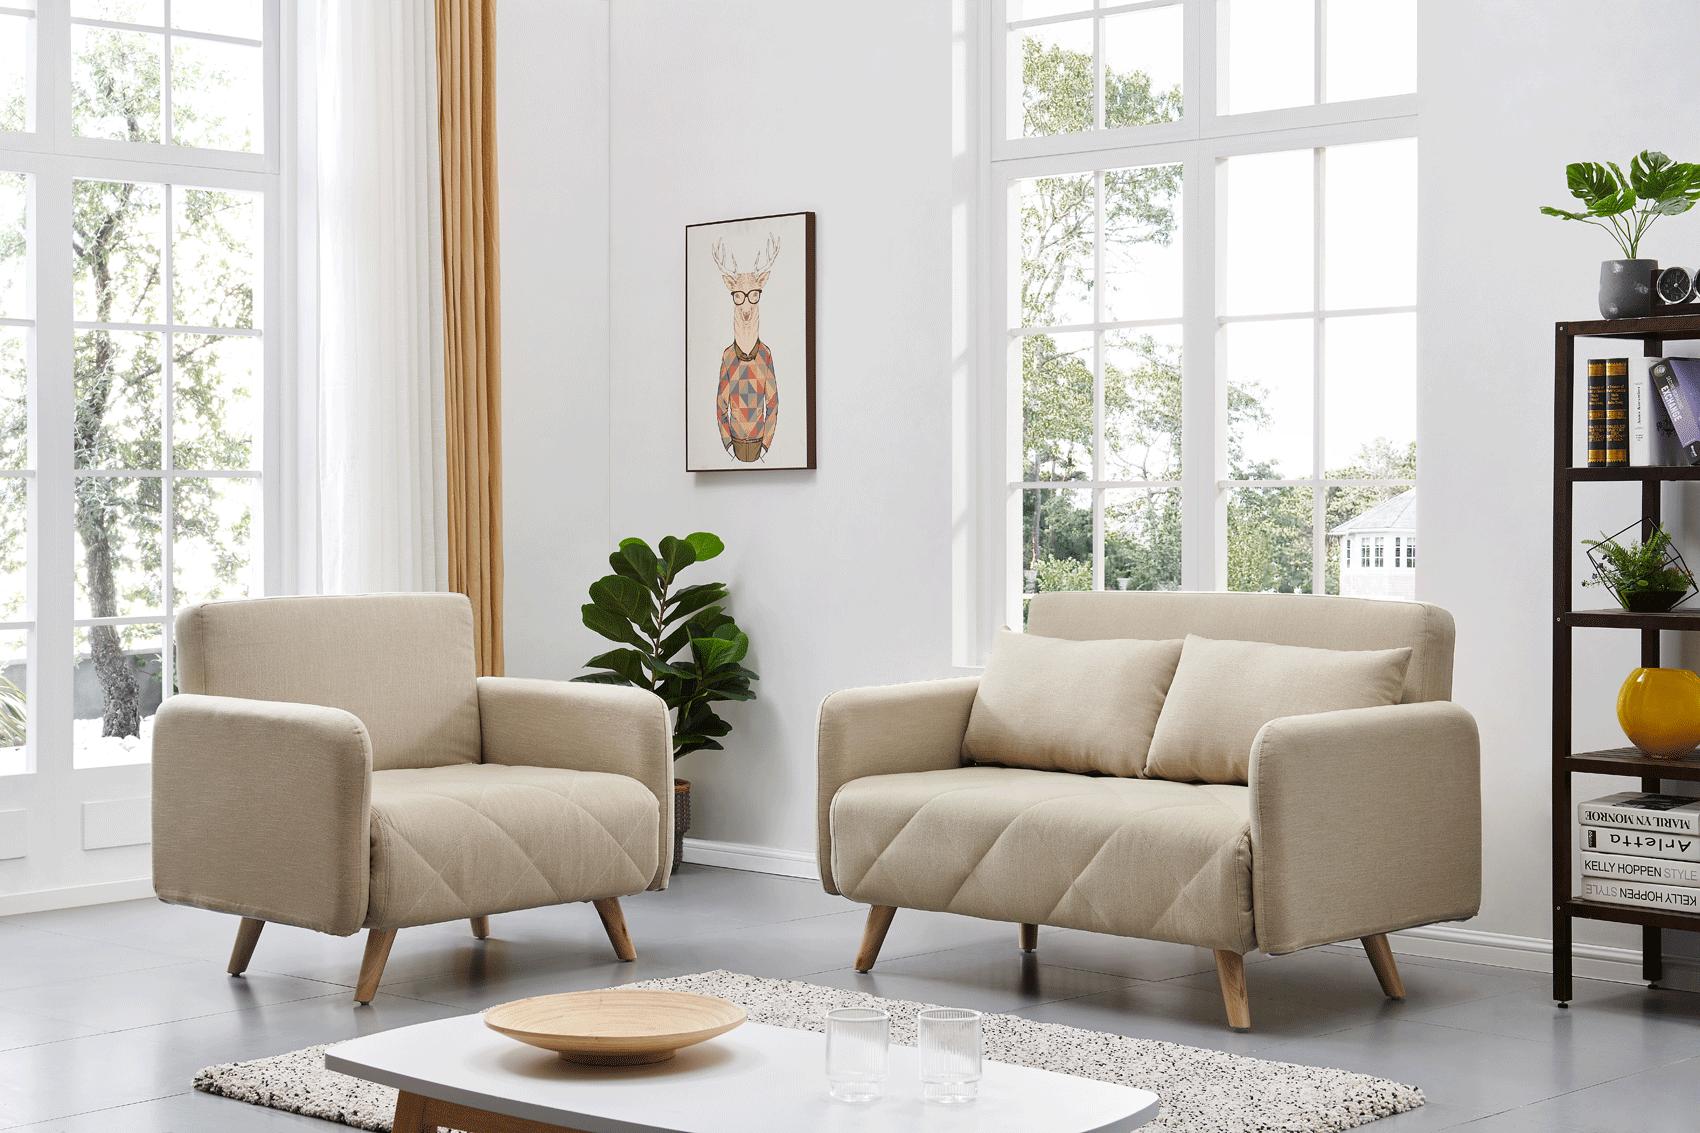 Contemporary Loveseat and Chair Set LH2080-L/C-BED-BEIGE LH2080-L/C-BED-BEIGE-Set-2 in Beige Fabric